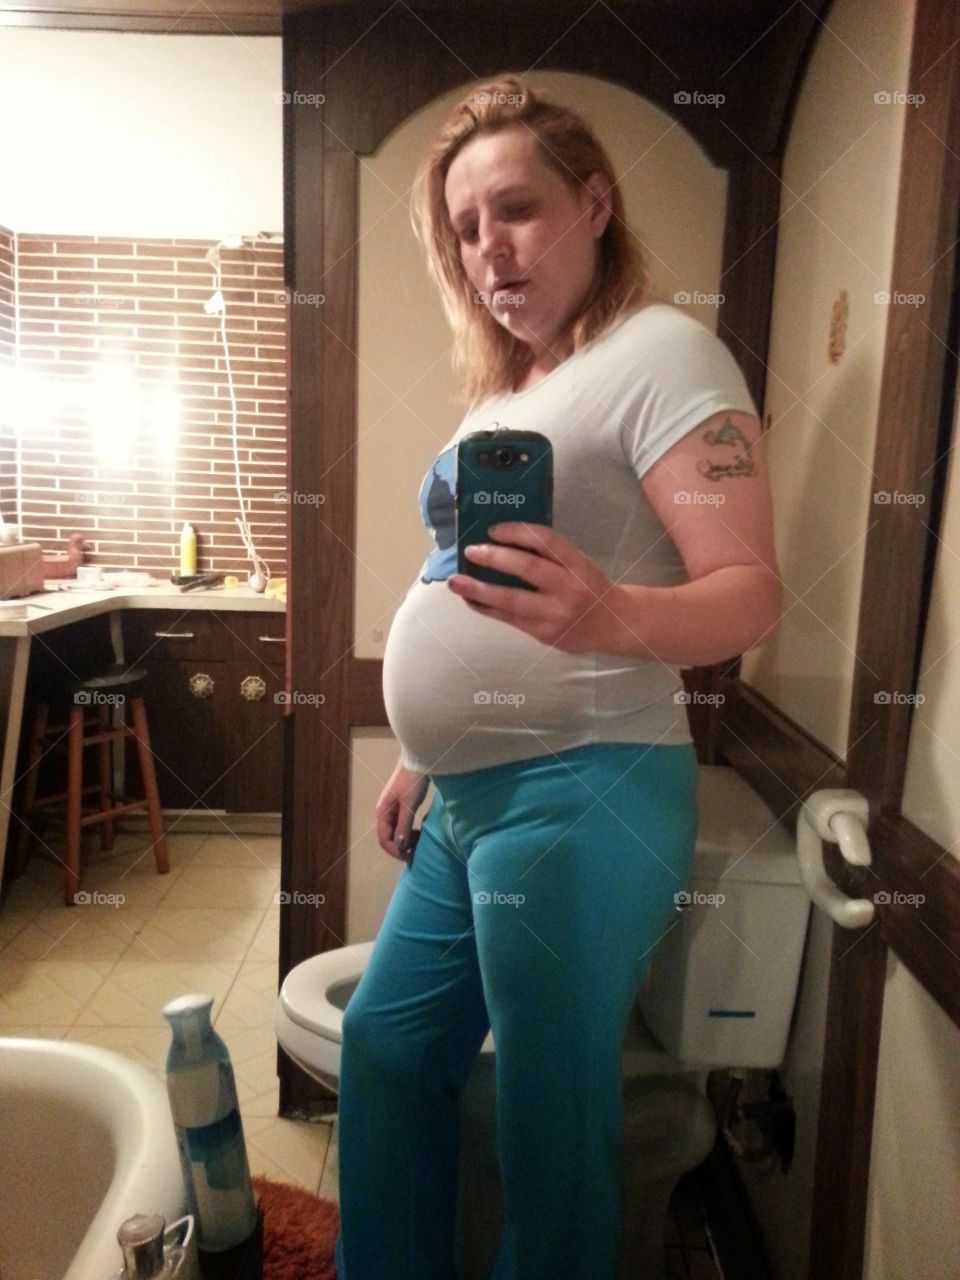 Big Belly. pregnancy count down